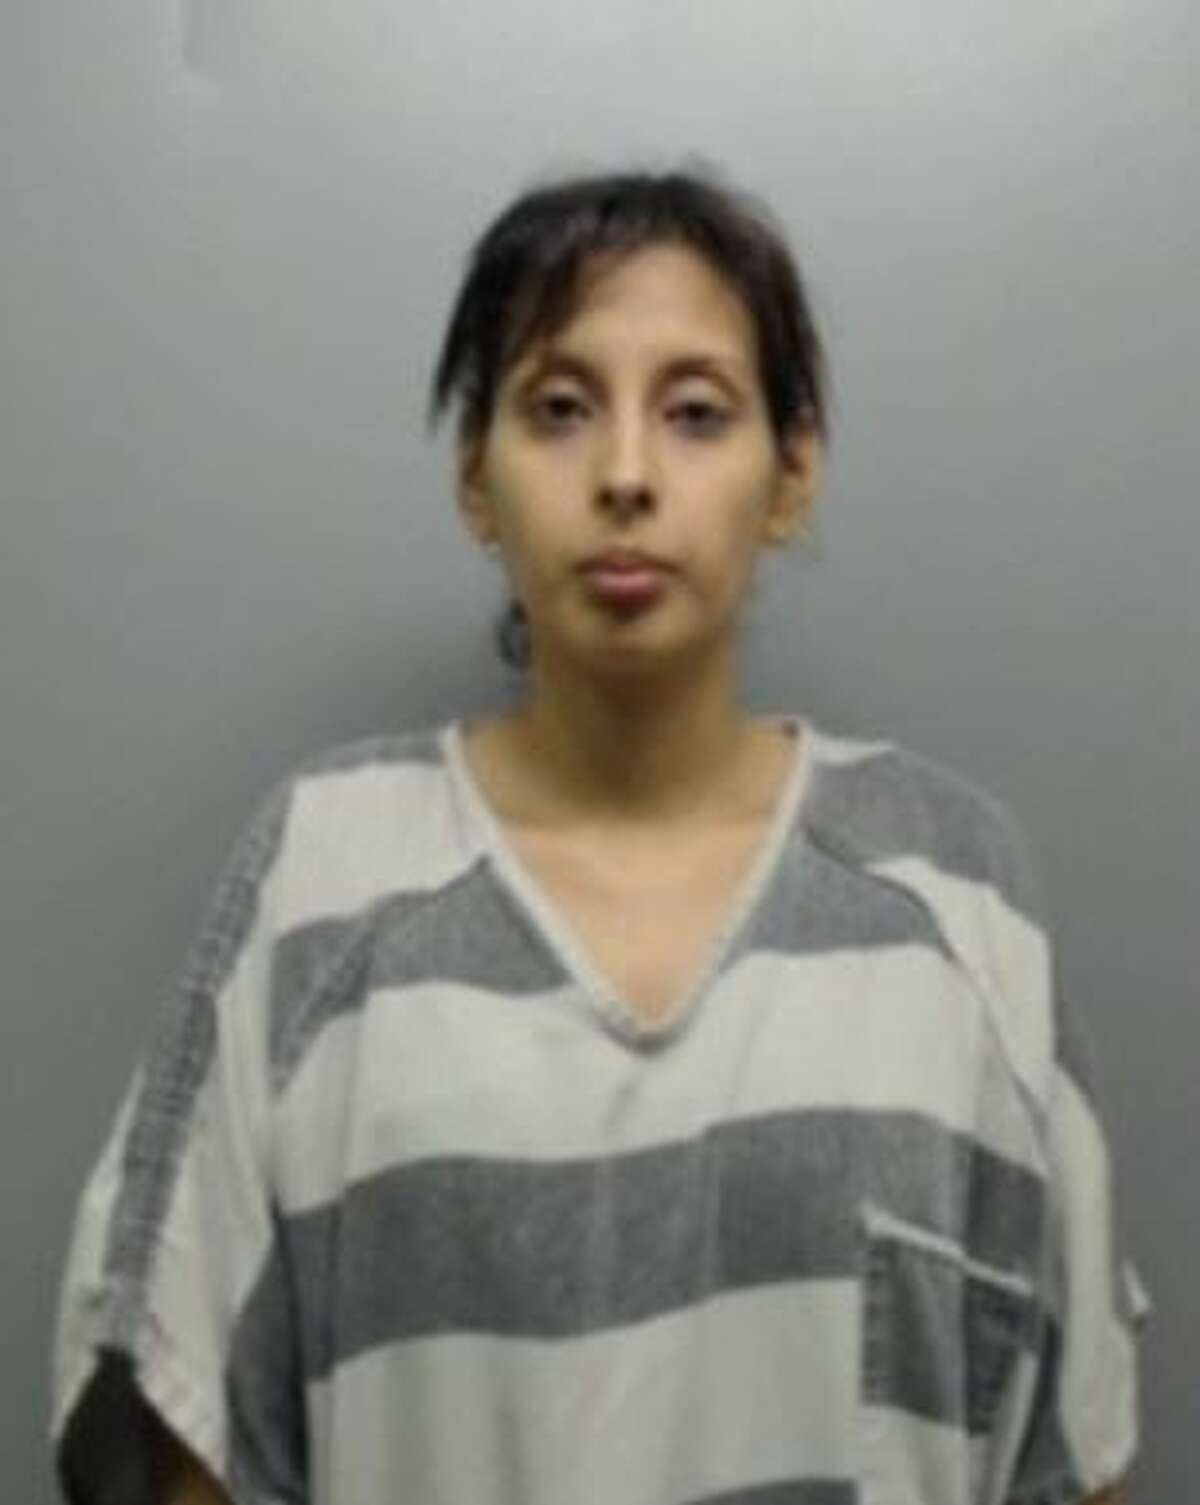 Vanessa Garza, 34, was served with warrants that charged her with 35 counts of credit or debit card abuse and felony theft.